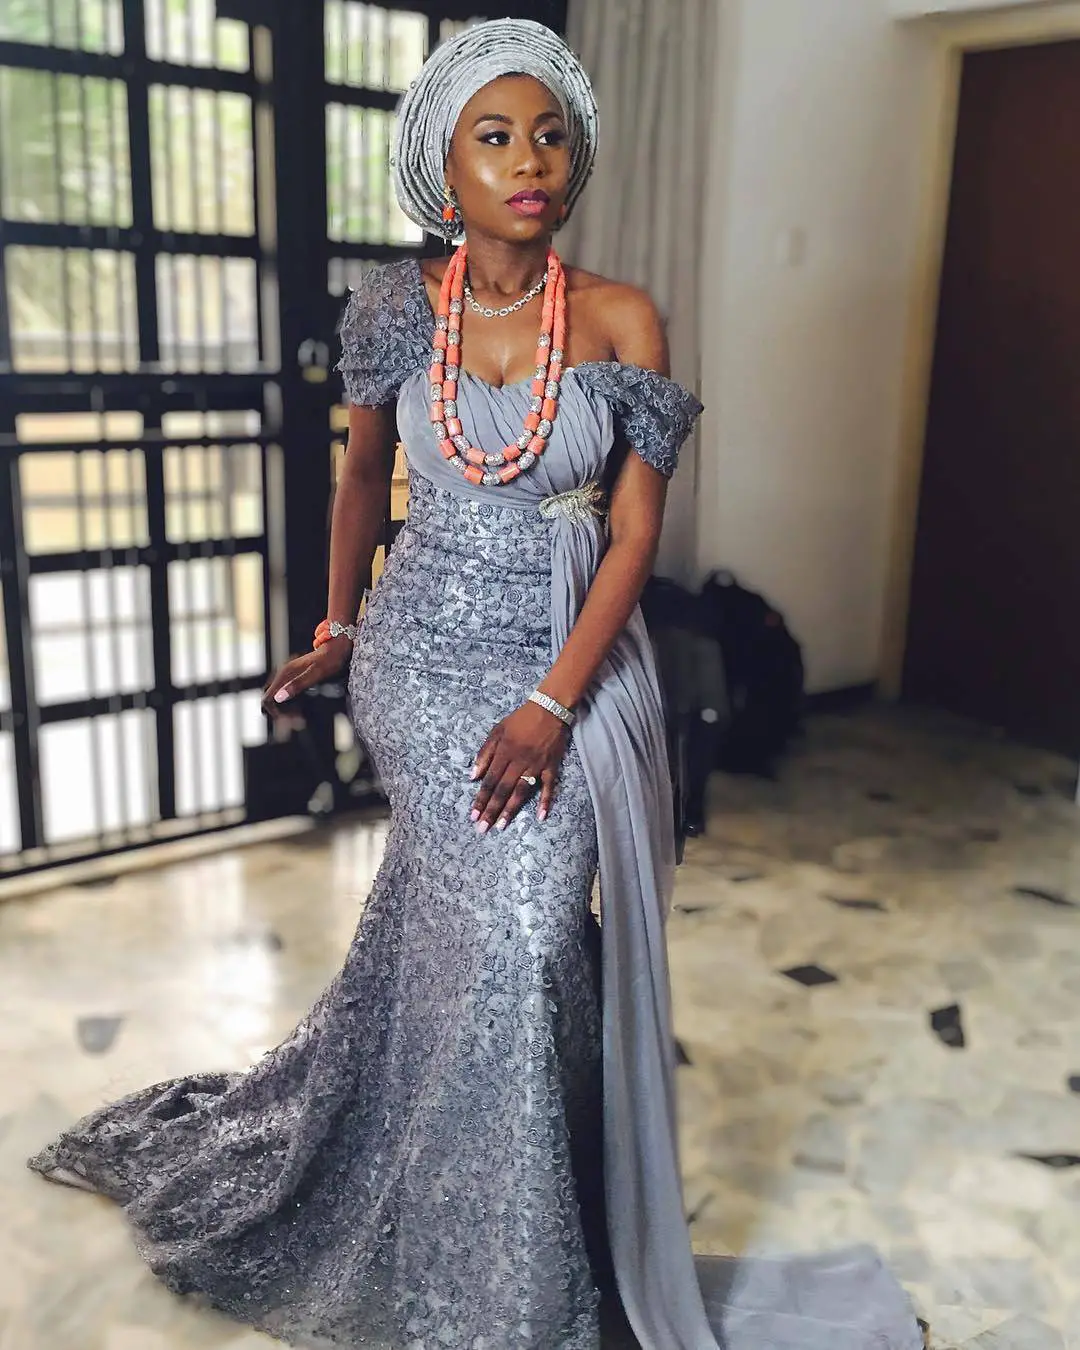 Brides That Came To Slay And Conquer In Their Bridal Styles